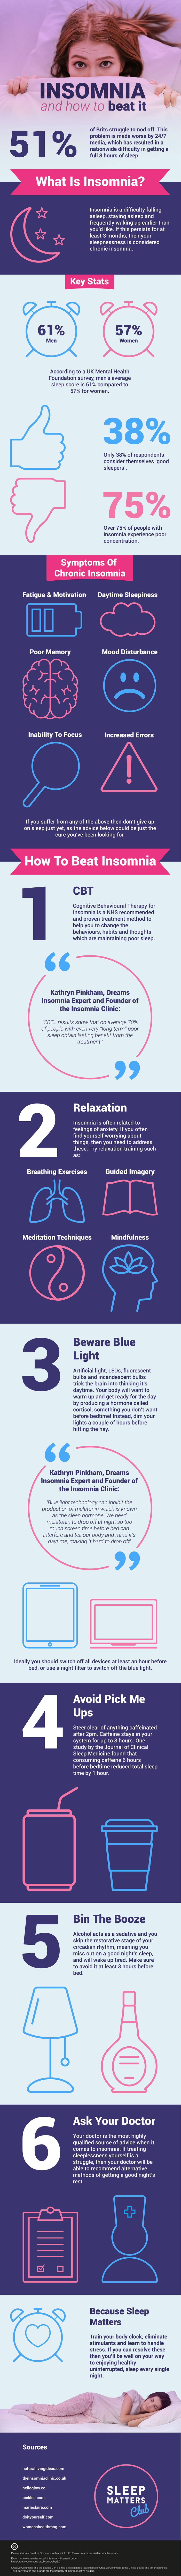 No More Sleepless Nights: How to Beat Insomnia - Infographic